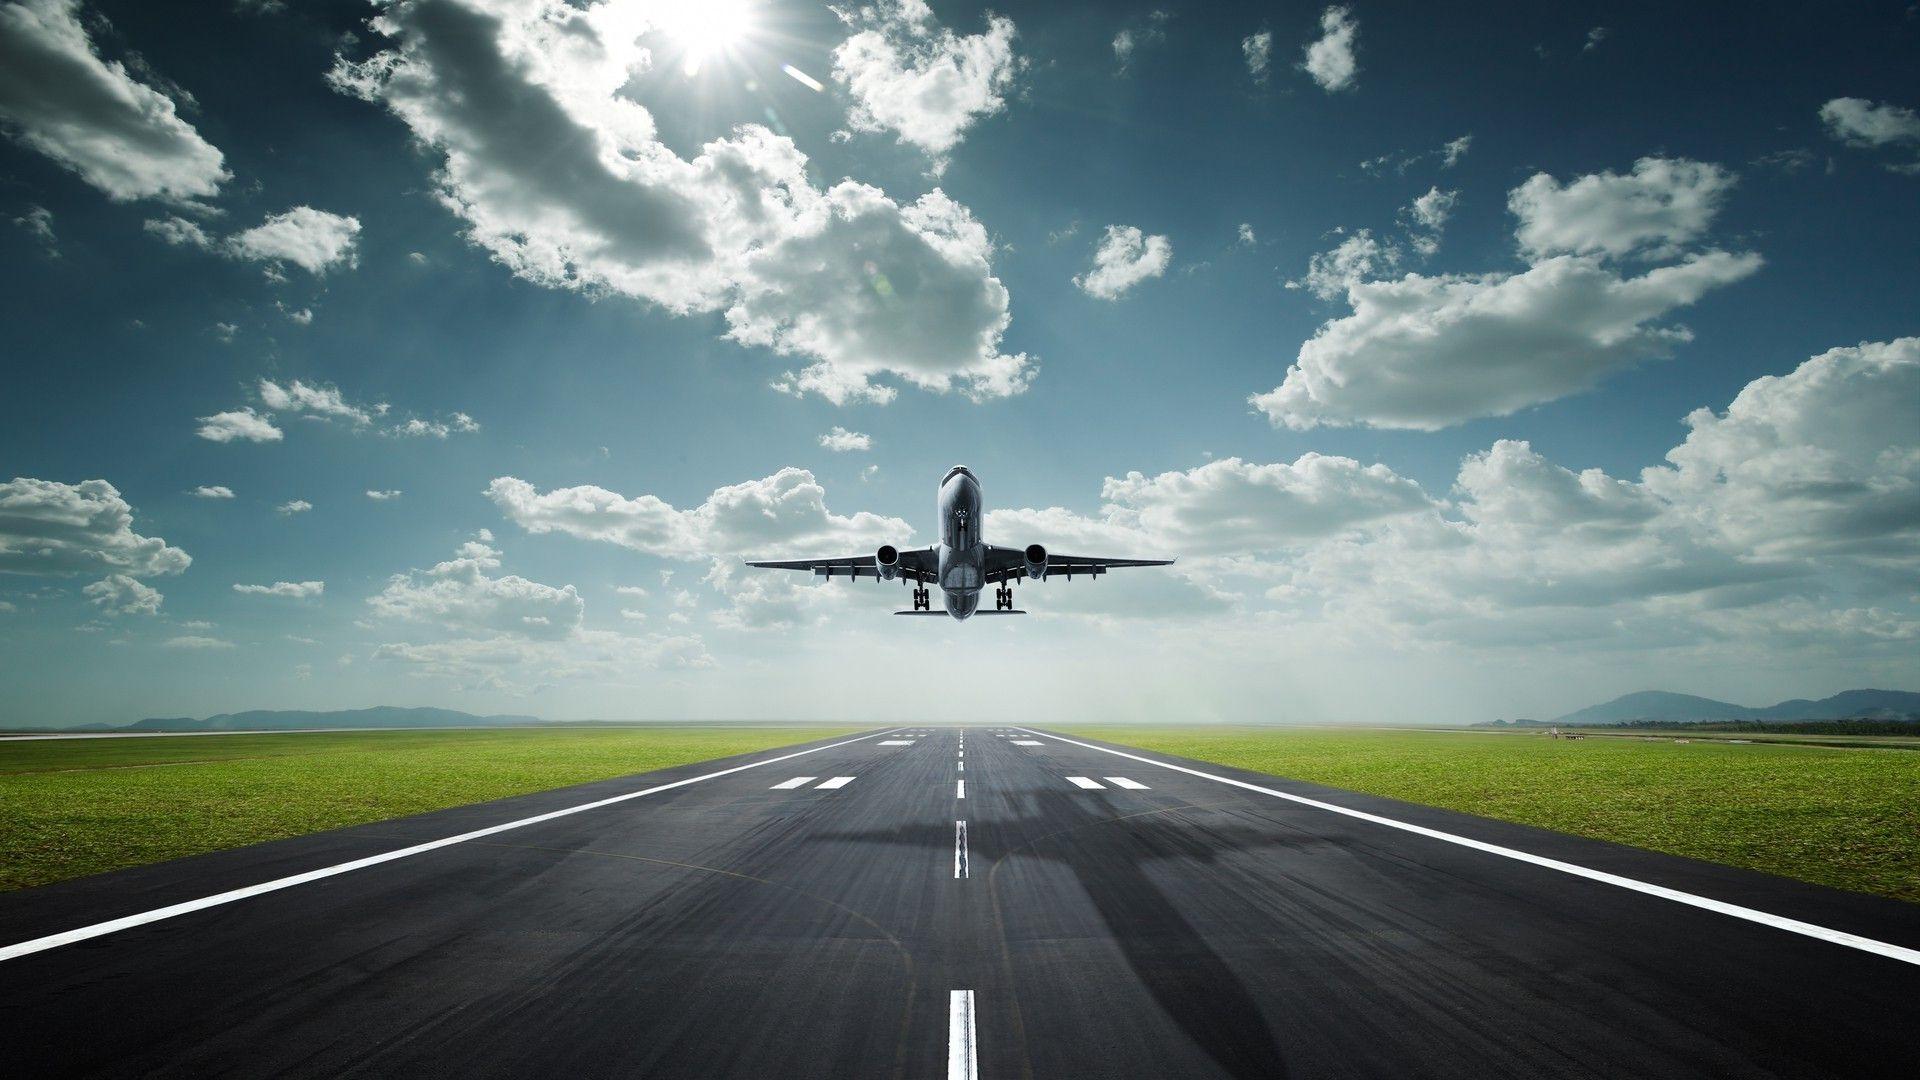 nature, Landscape, Road, Lines, Clouds, Airplane, Runway, Aircraft